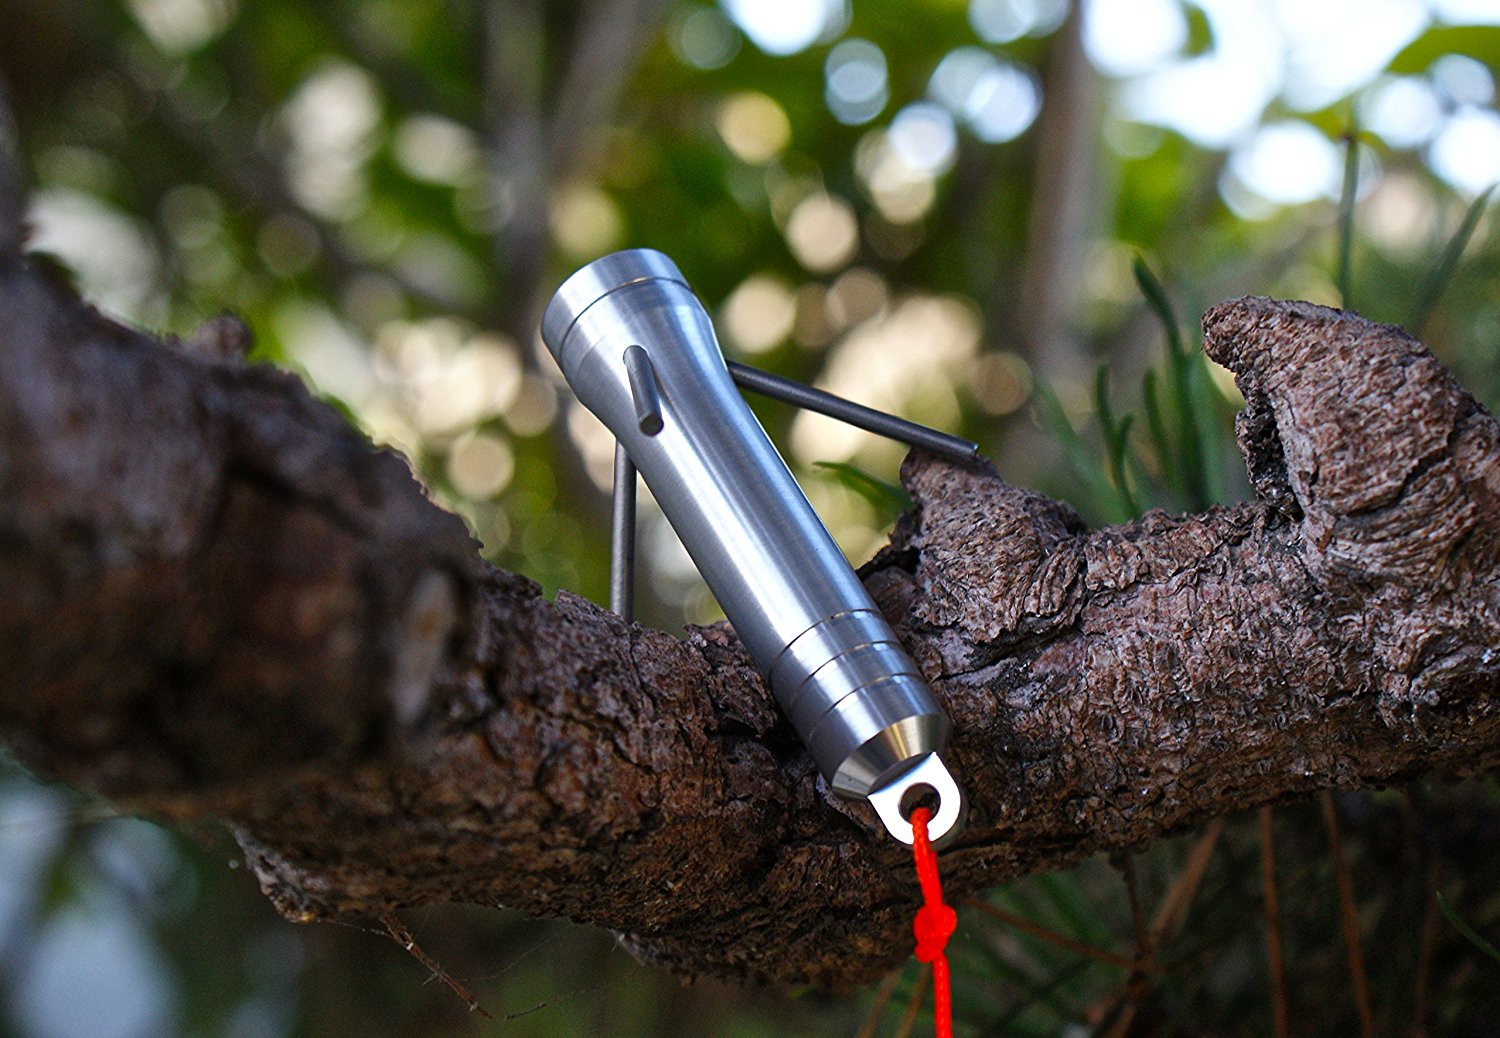 The Retreev mini grappling hook. ($30 for stainless steel, $32 for red + black)